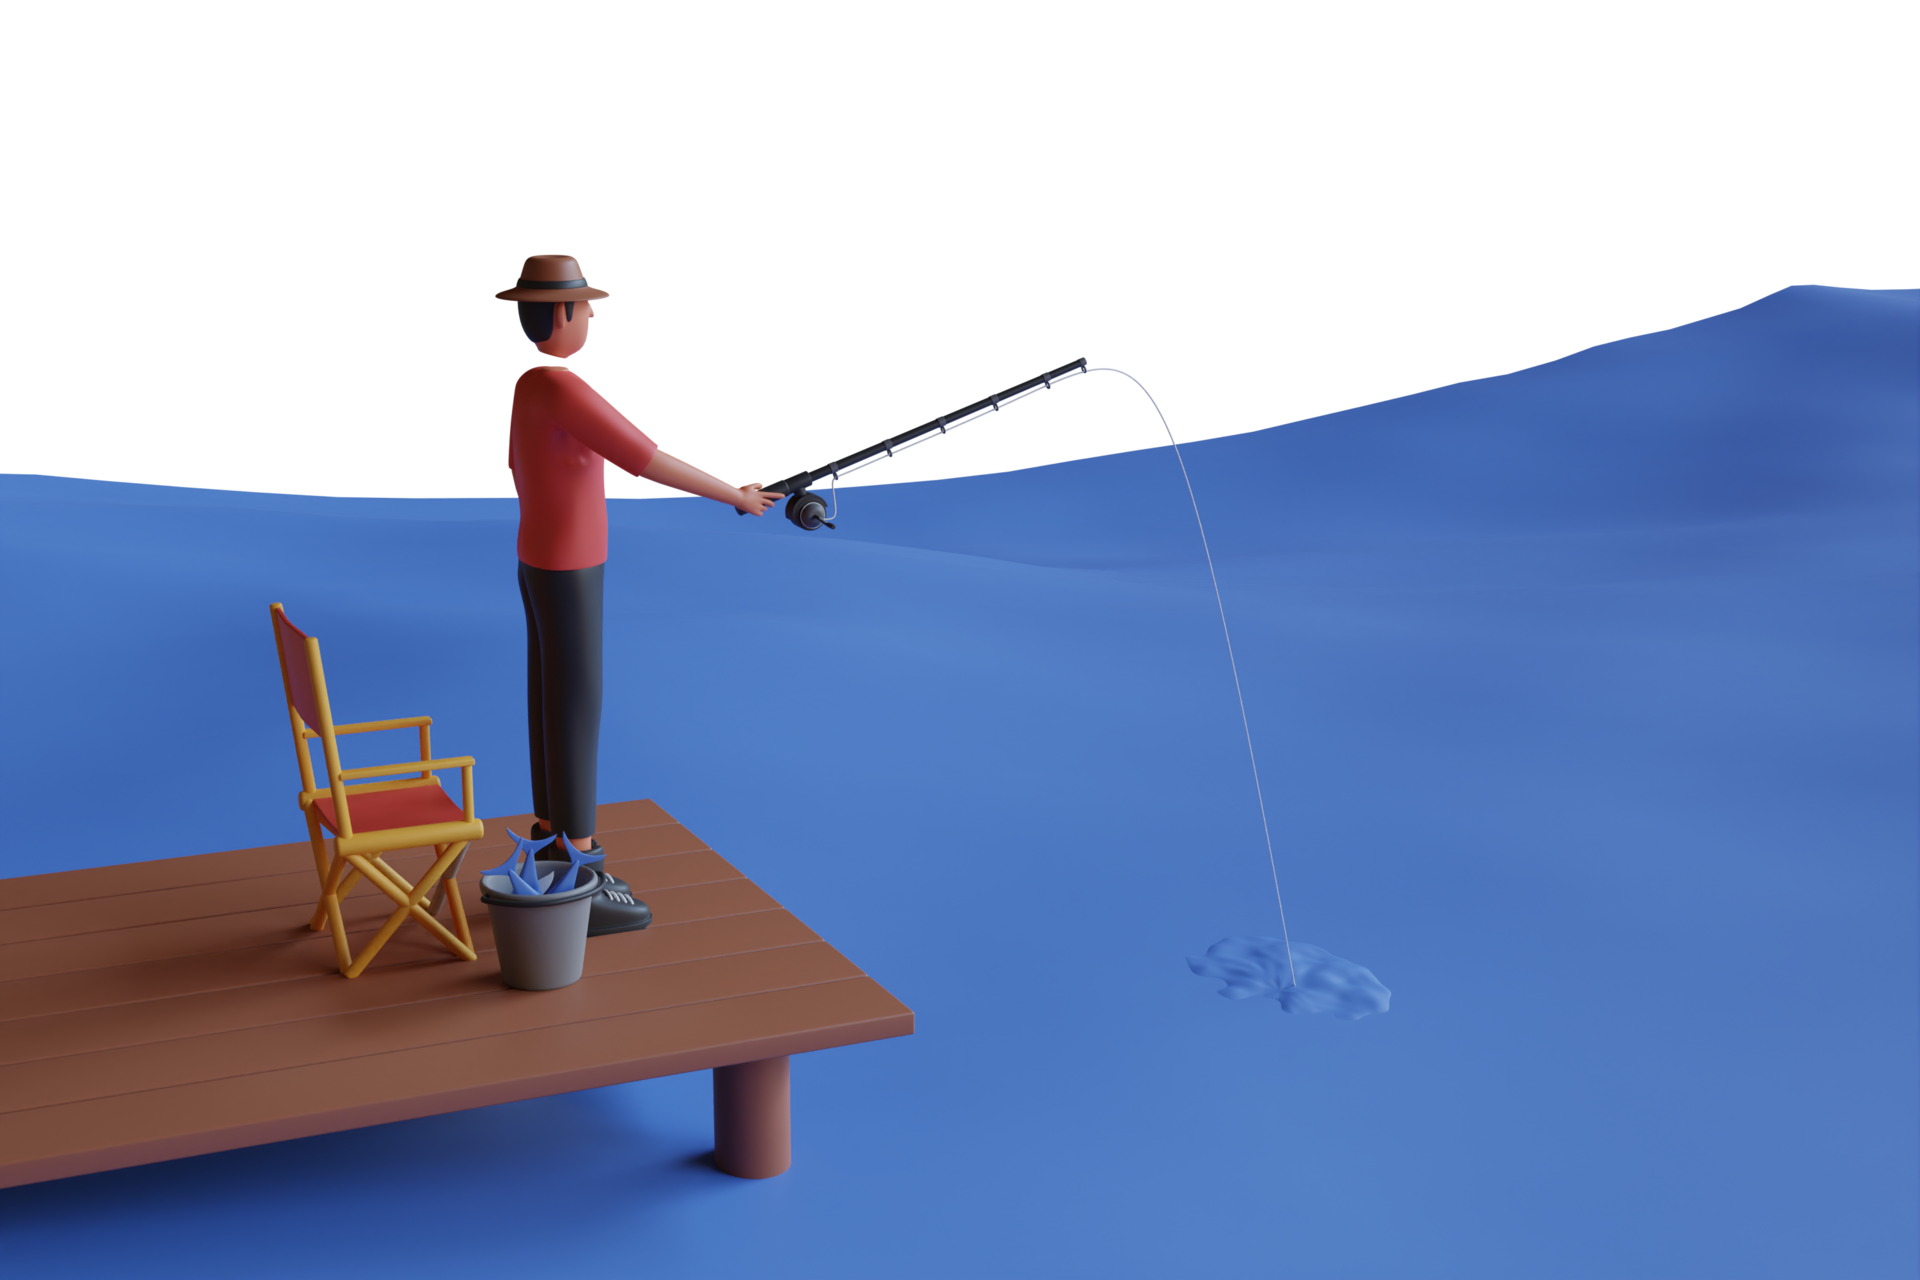 https://static.vecteezy.com/system/resources/previews/021/665/959/original/3d-illustration-of-man-fishing-in-the-lake-man-is-fishing-in-a-pond-with-a-fishing-rod-in-his-hands-fishing-nature-solitude-hobby-vacation-concept-png.png